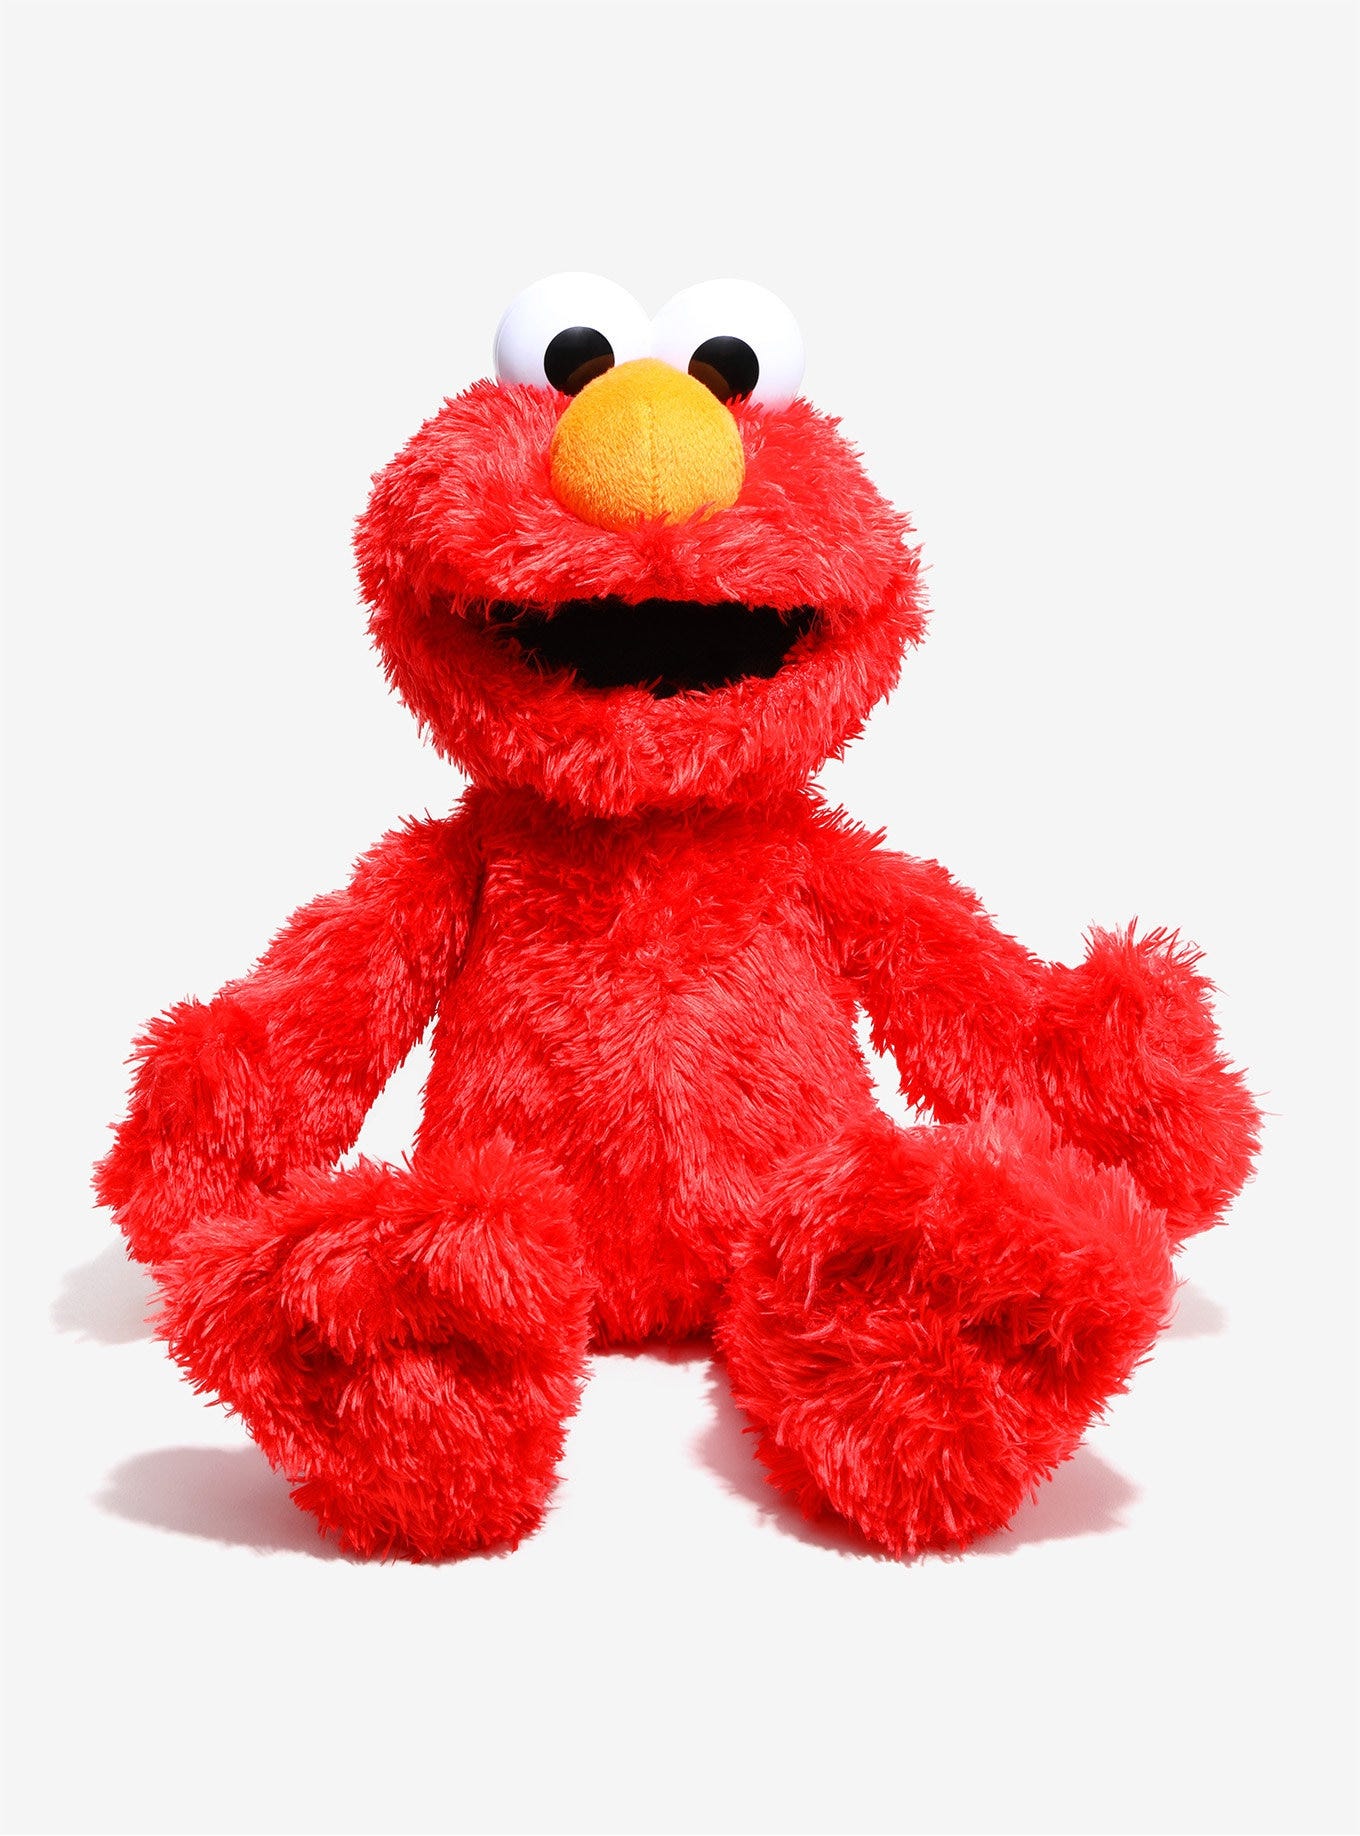 Tickle Me Elmo. Tickle Me Elmo created by Tyco to… | by Scott Dombkowski |  Men Are from Kepler-438b, Women Are from Kepler-442b | Medium